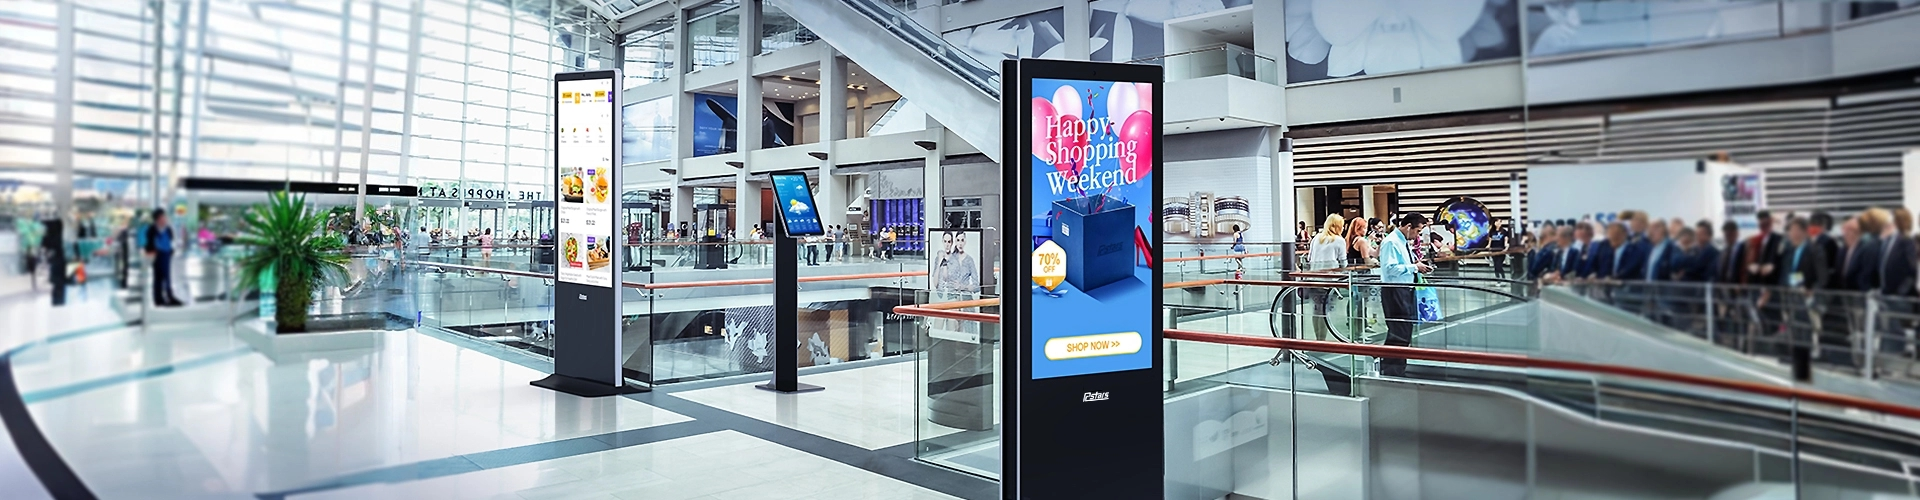 32 inch Indoor Freestanding Self Checkout Kiosk for Sale